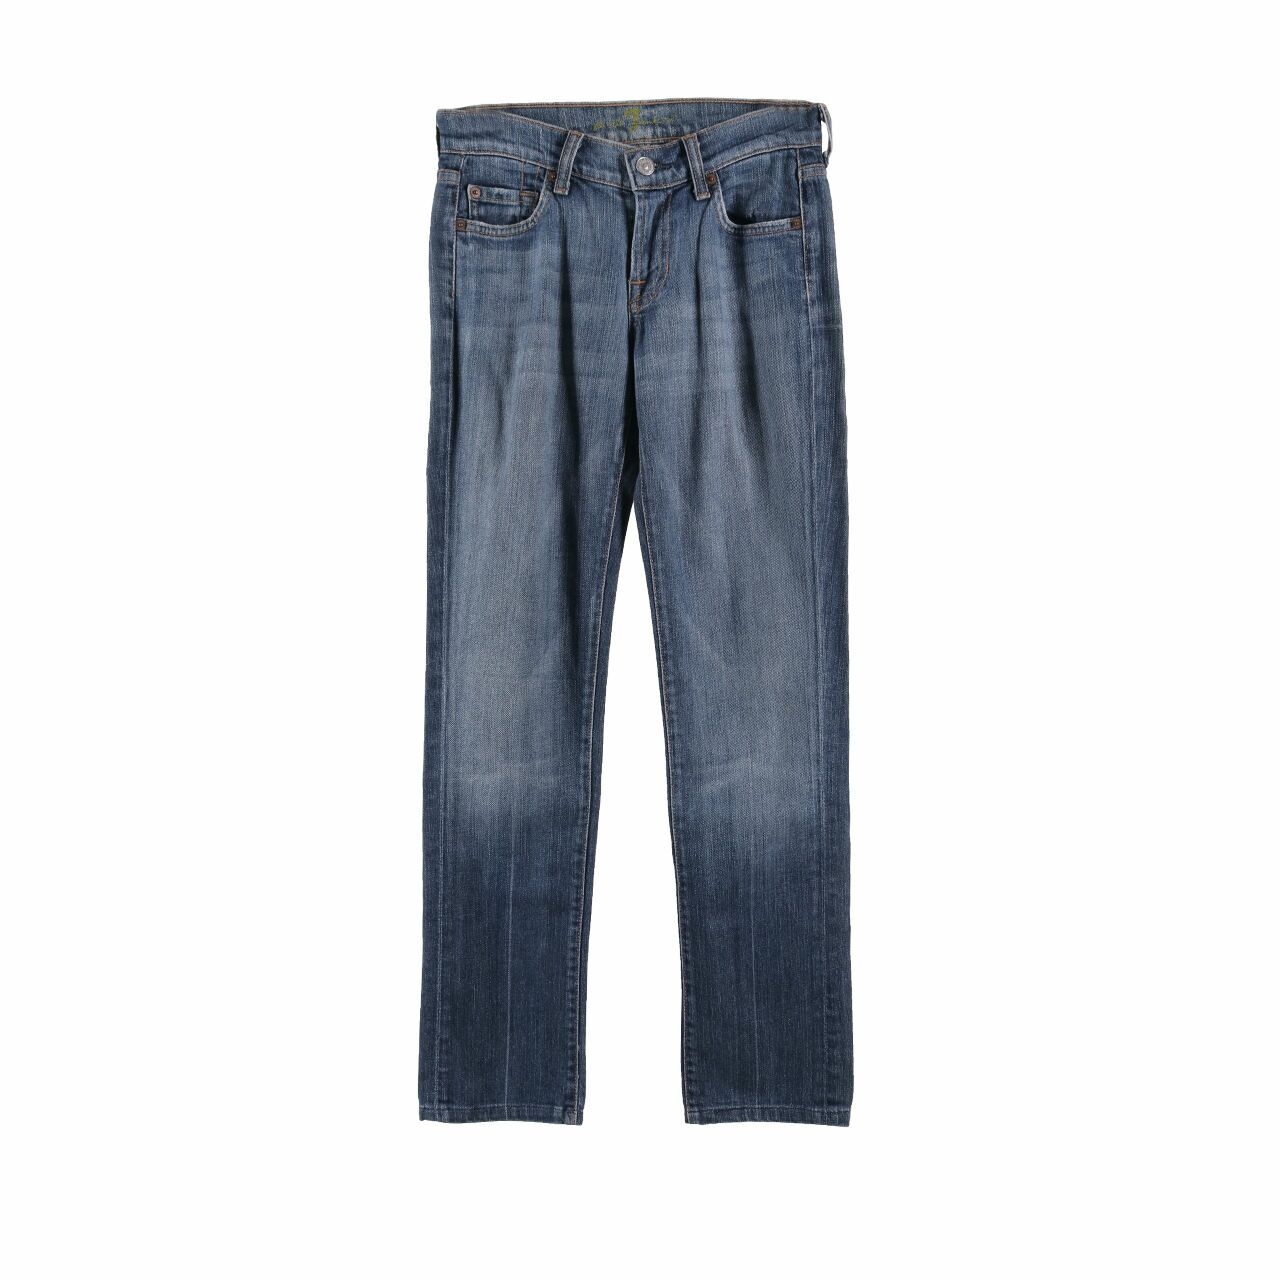 7 For All Mankind Jeans Long Pants